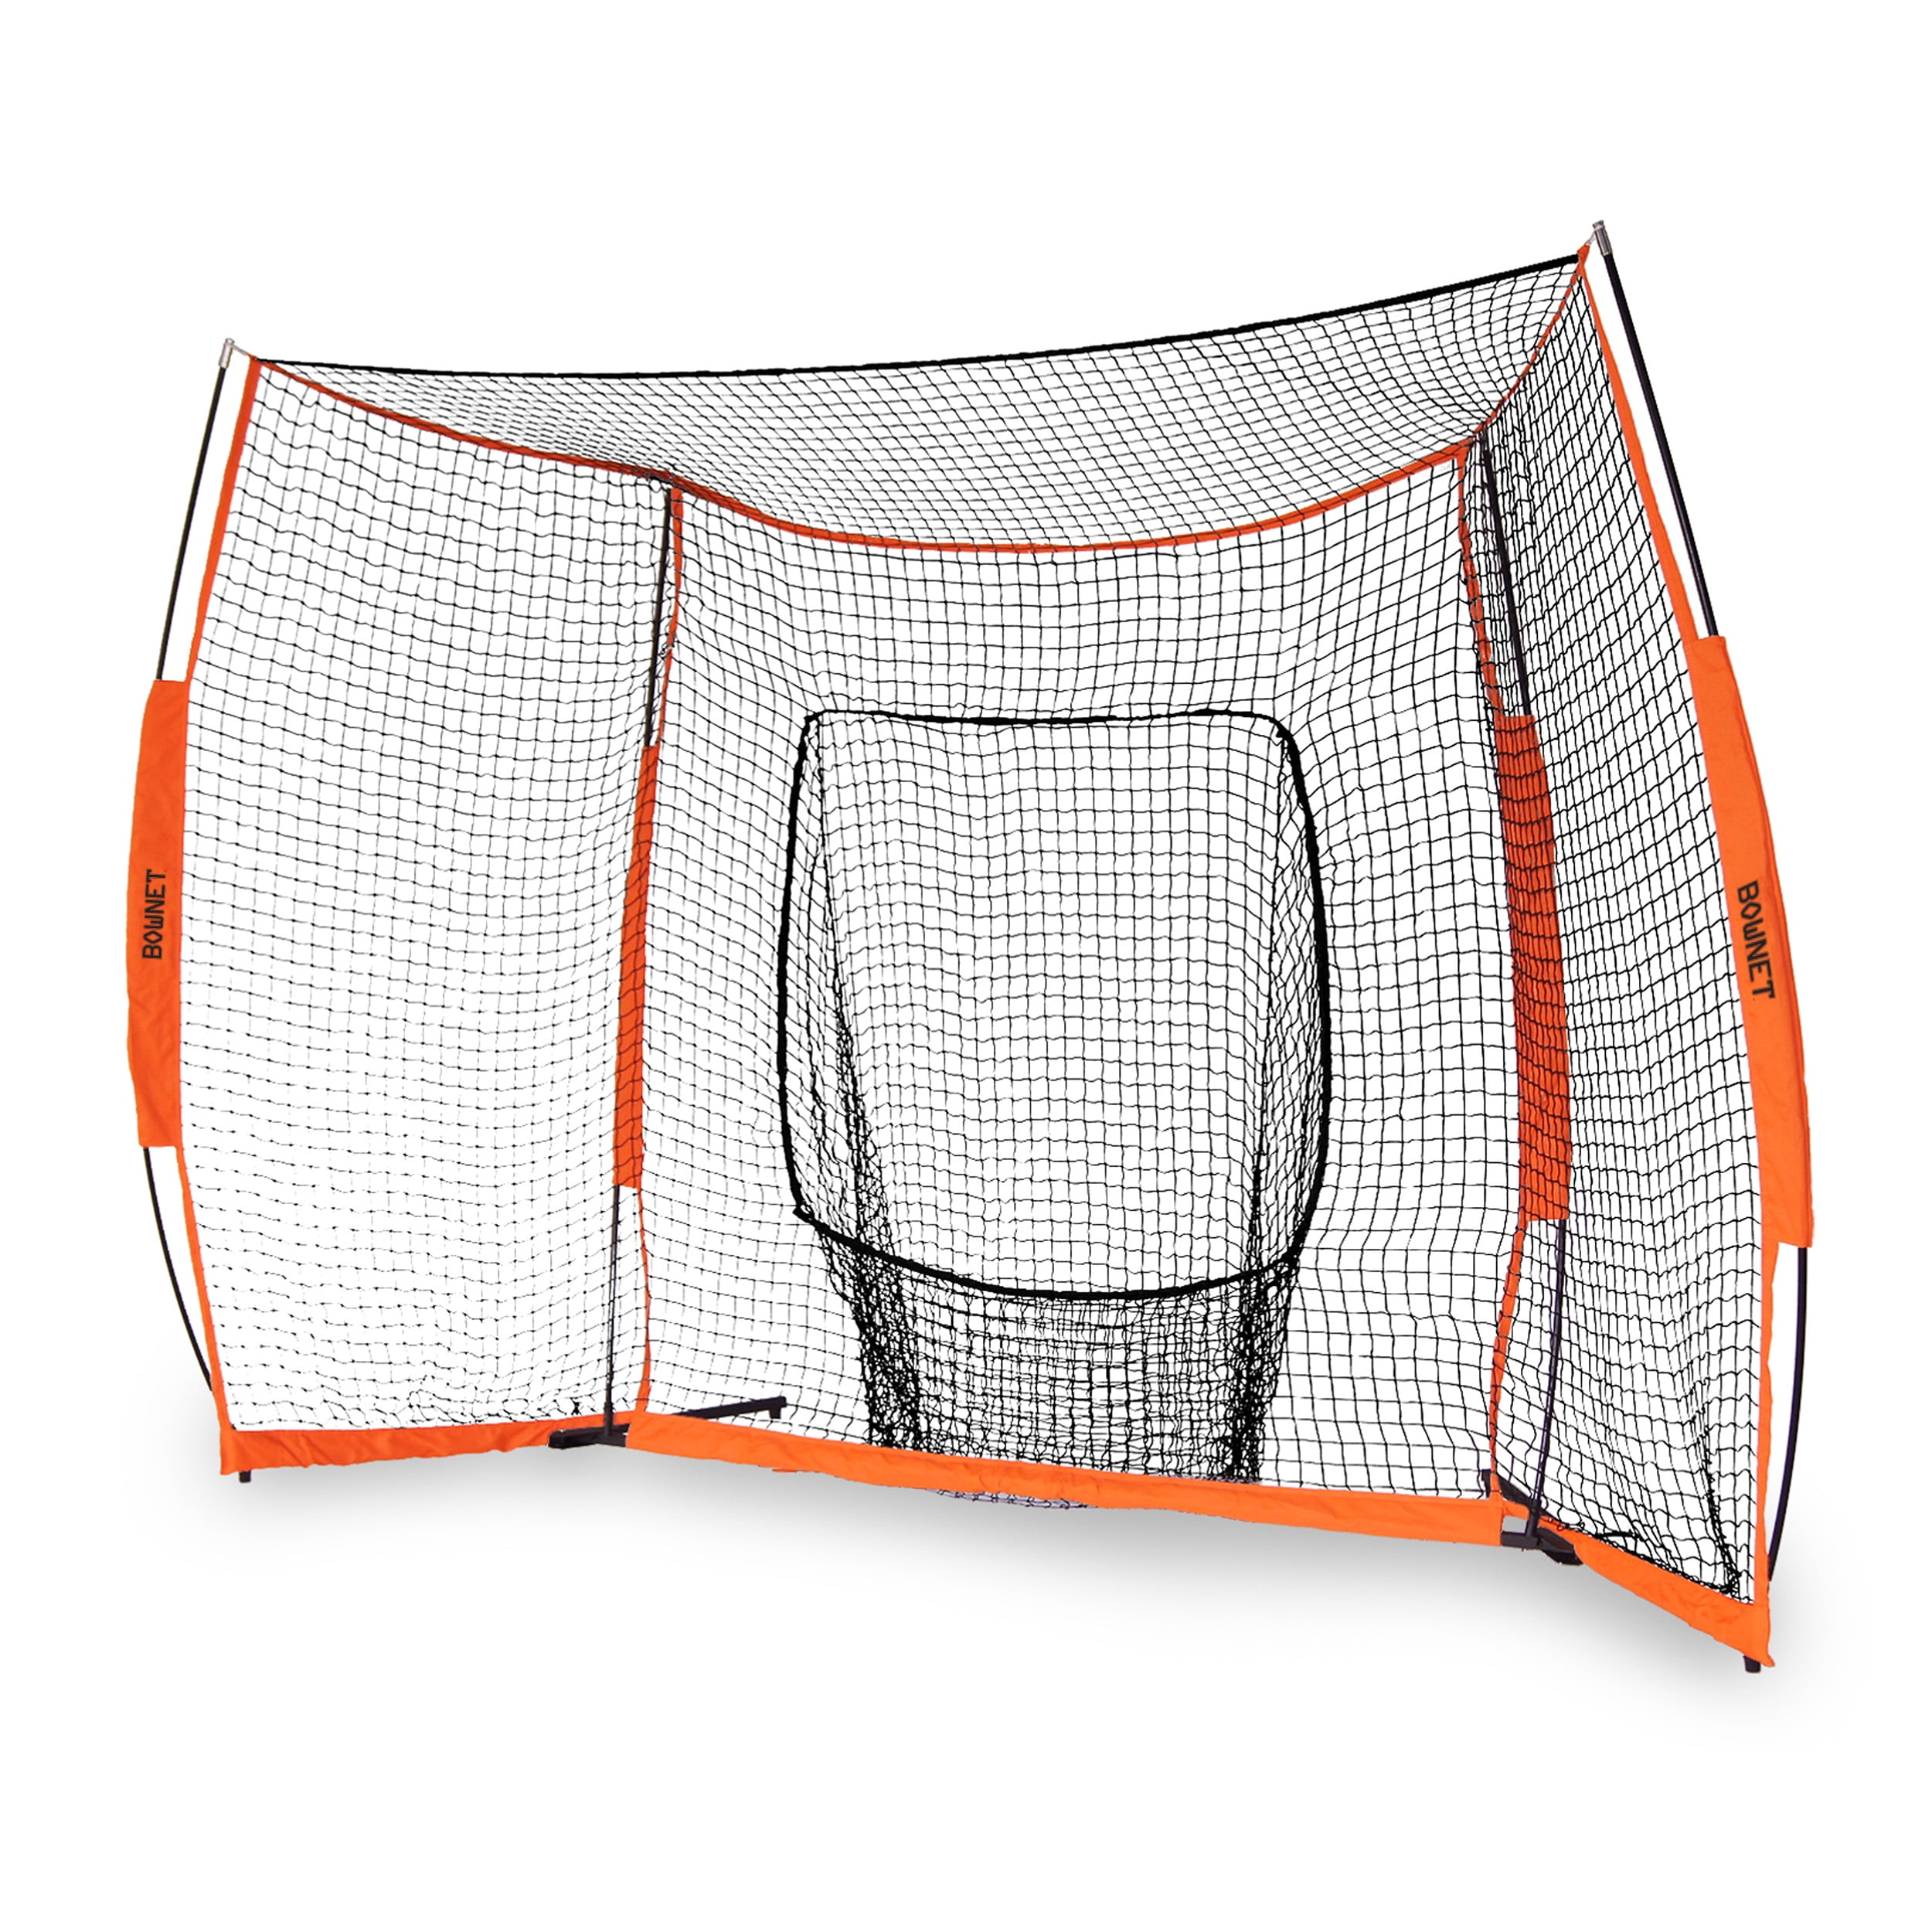 & Adults Teens HEATER SPORTS Hitting Station 3-in-1 Lightweight & Portable Ball Net & Batting Tee Package For Kids 